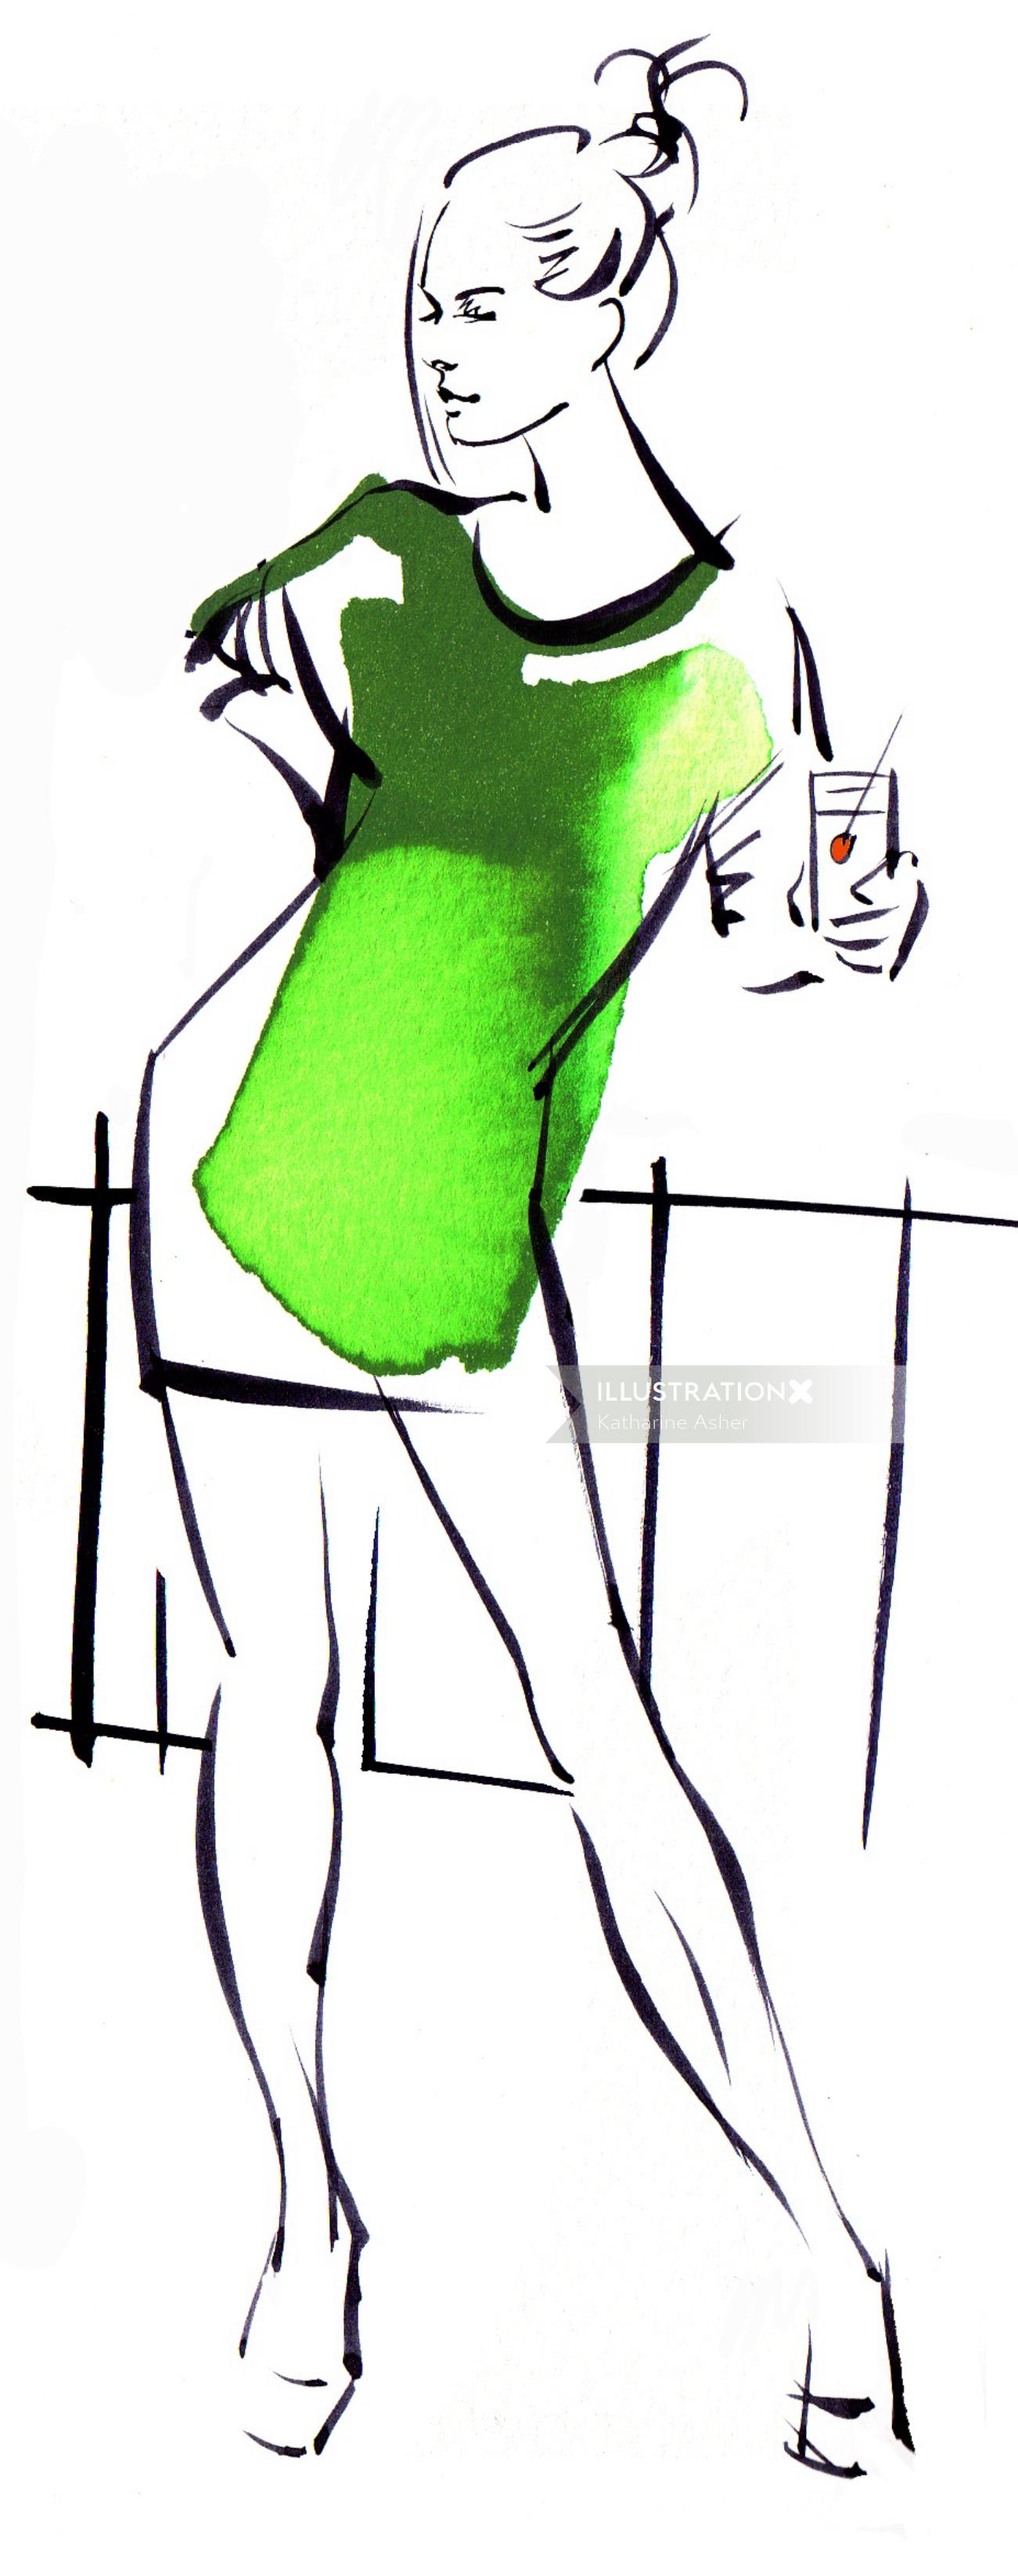 Woman model illustration by Katharine Asher